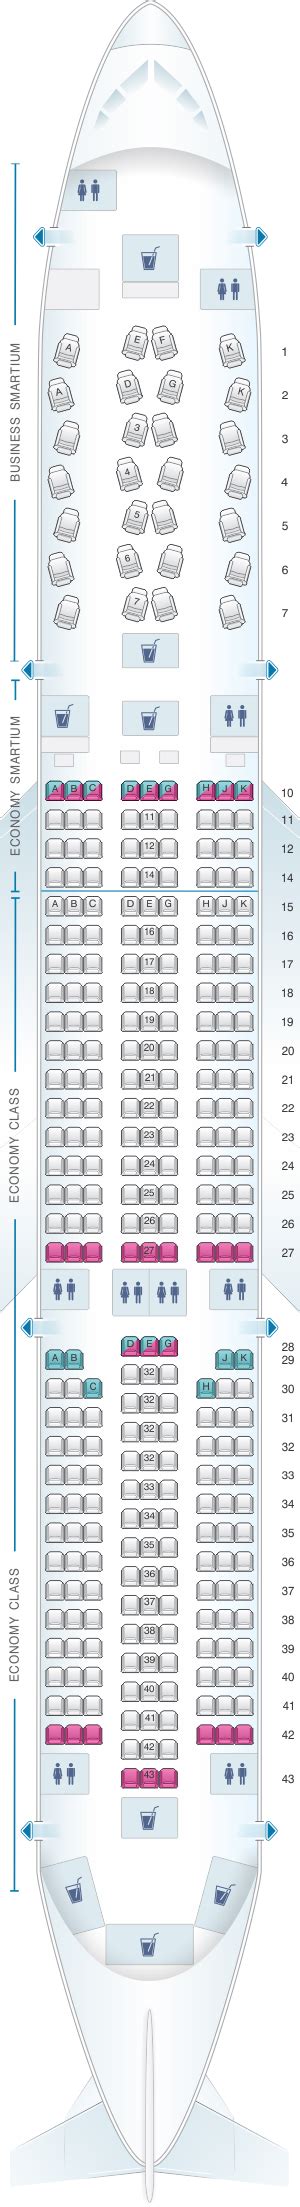 Asiana Airlines Economy Class Seats